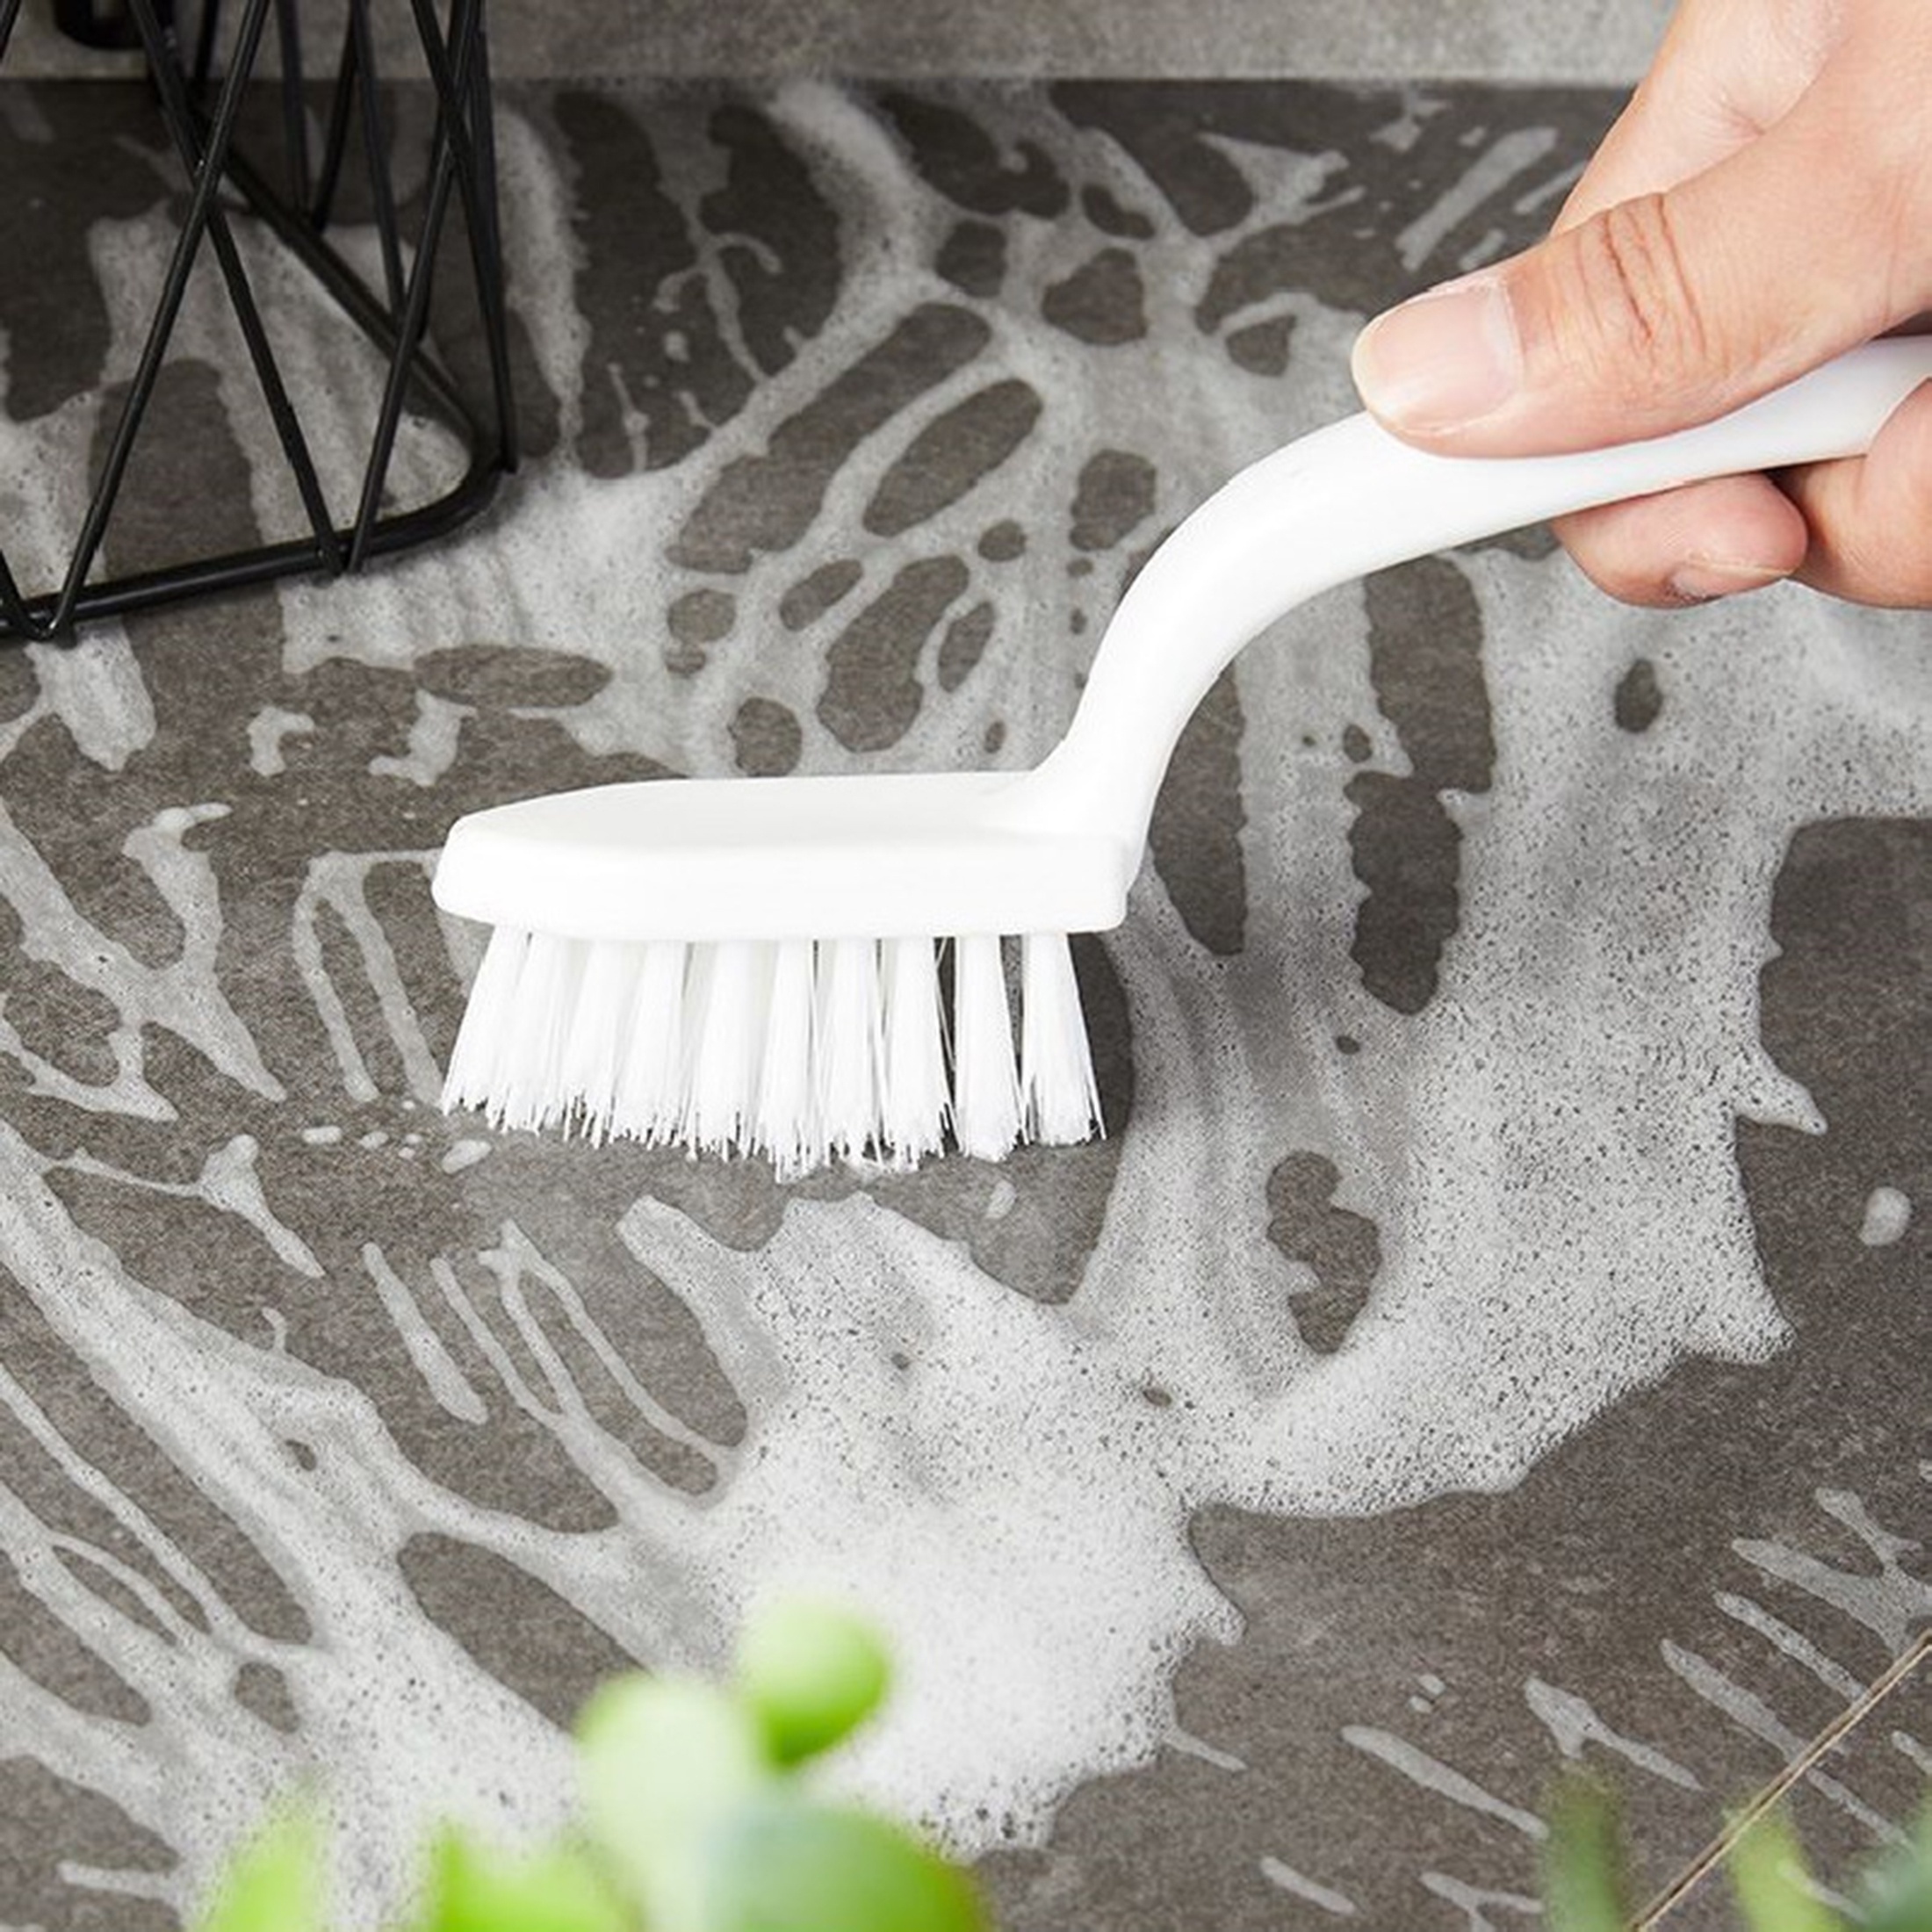 Bathroom Gap Cleaning Brush,Small Hard Bristle Crevice Cleaning